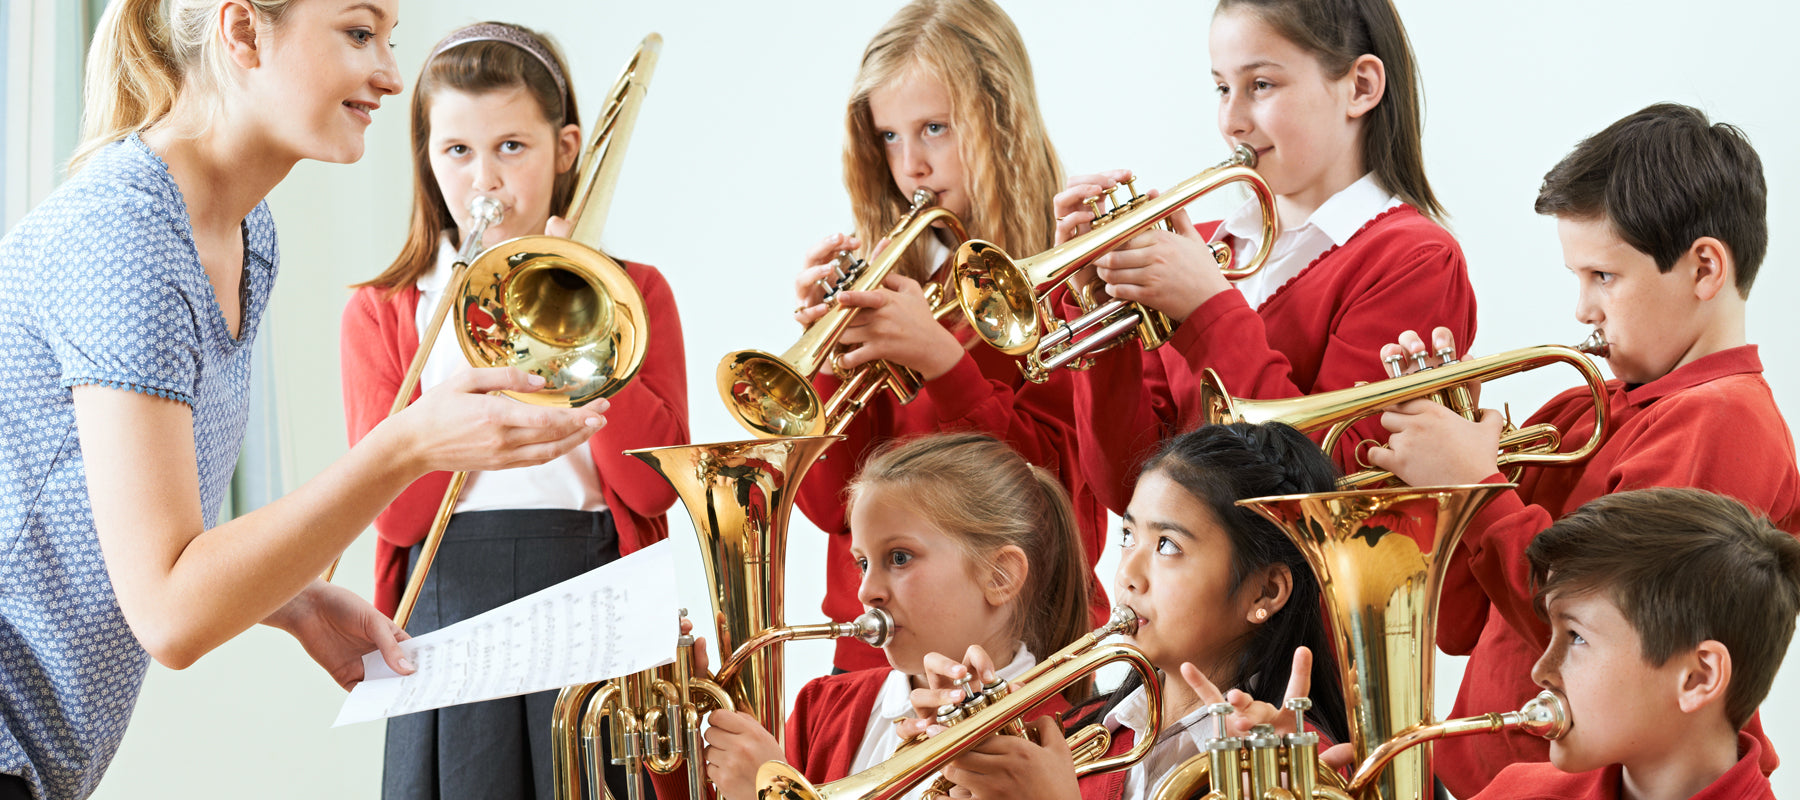 Our brass wind instruments